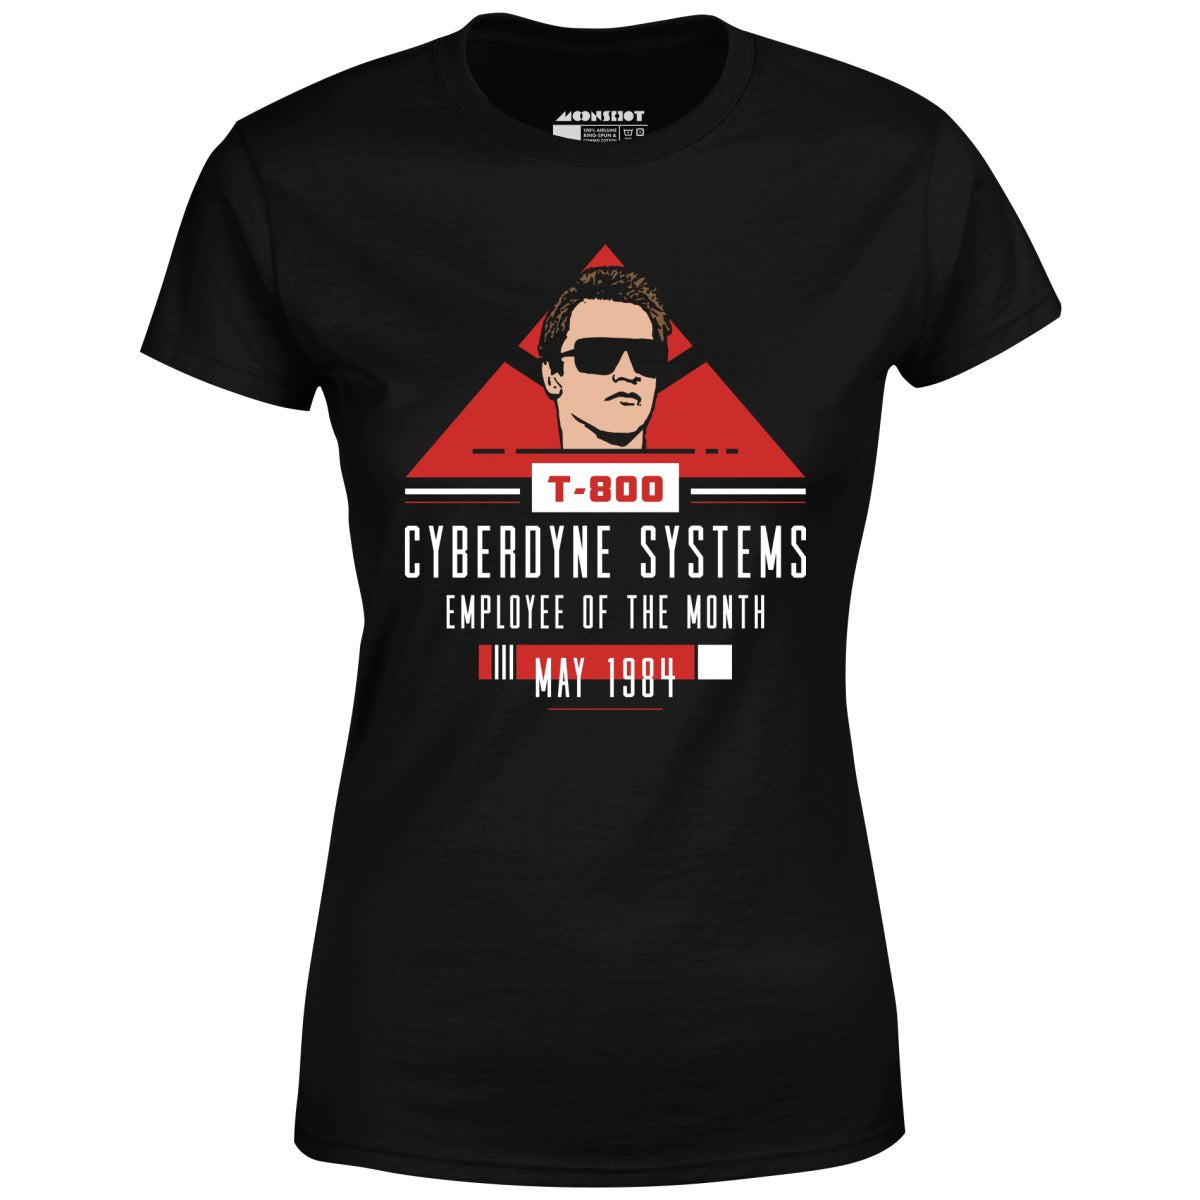 T-800 Cyberdyne Systems Employee of the Month - Women's T-Shirt